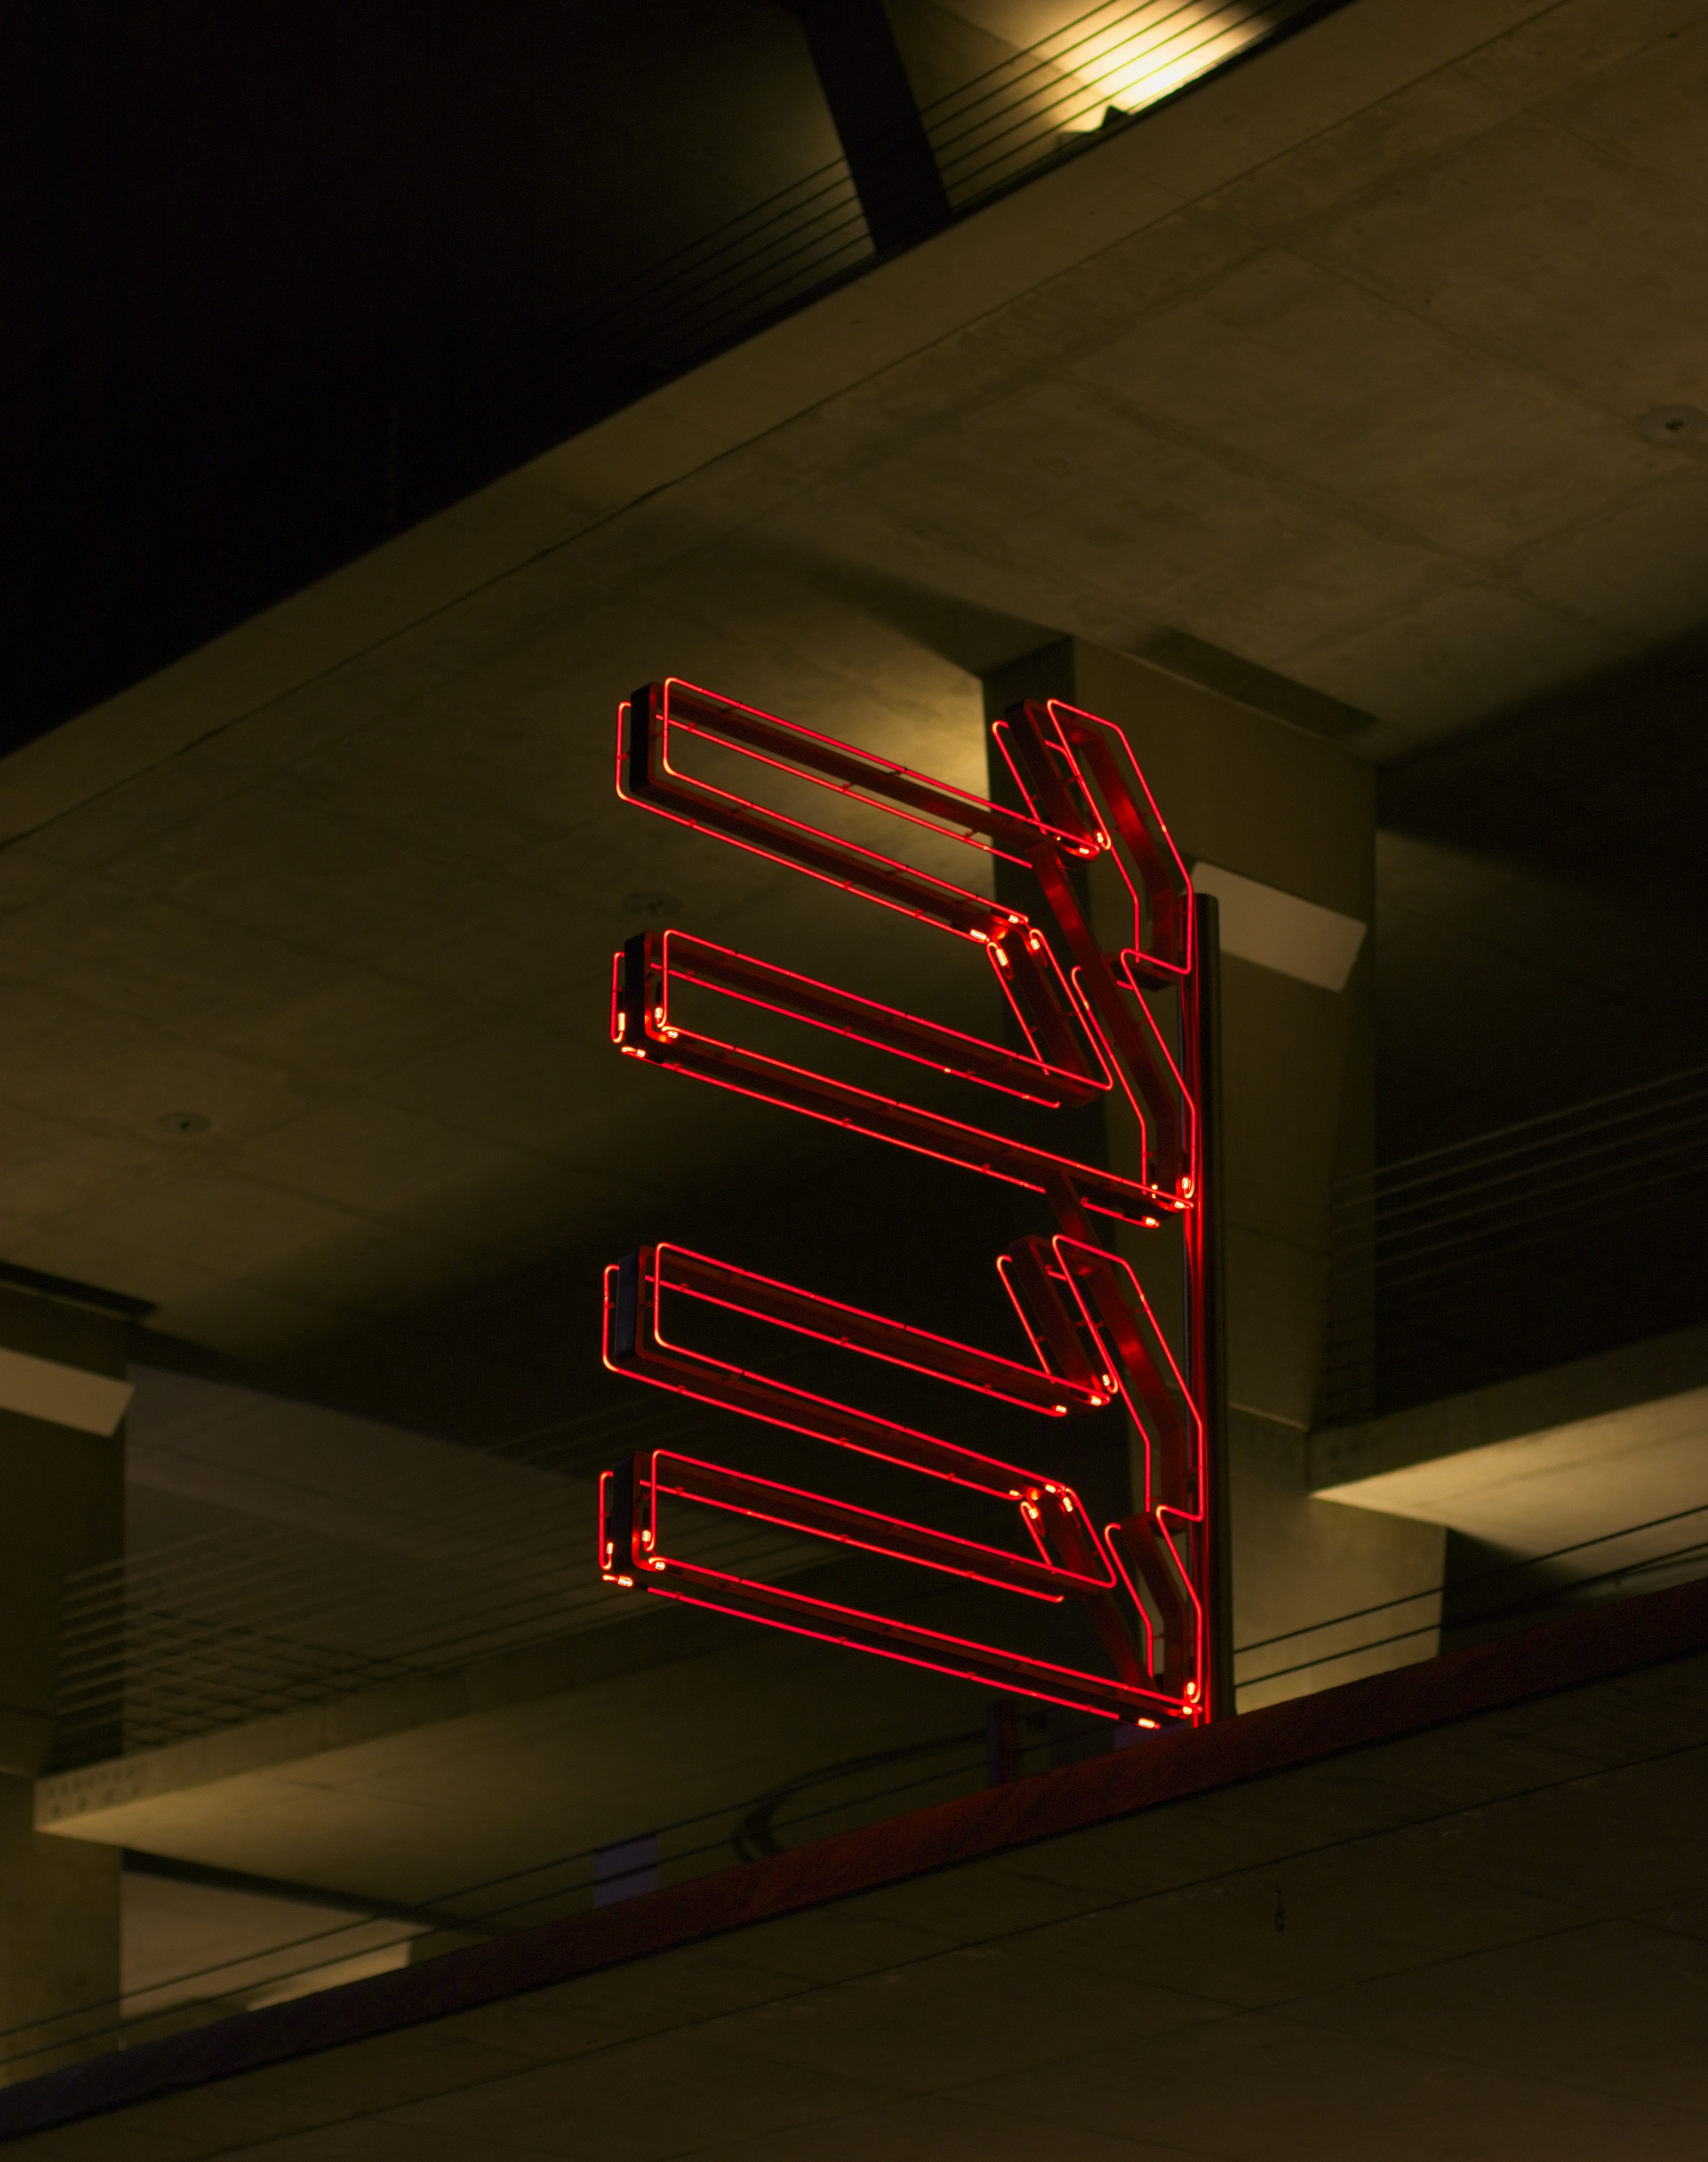 signboard, red, shine, light, miscellanea, miscellaneous, neon, lamp, sign, lamps